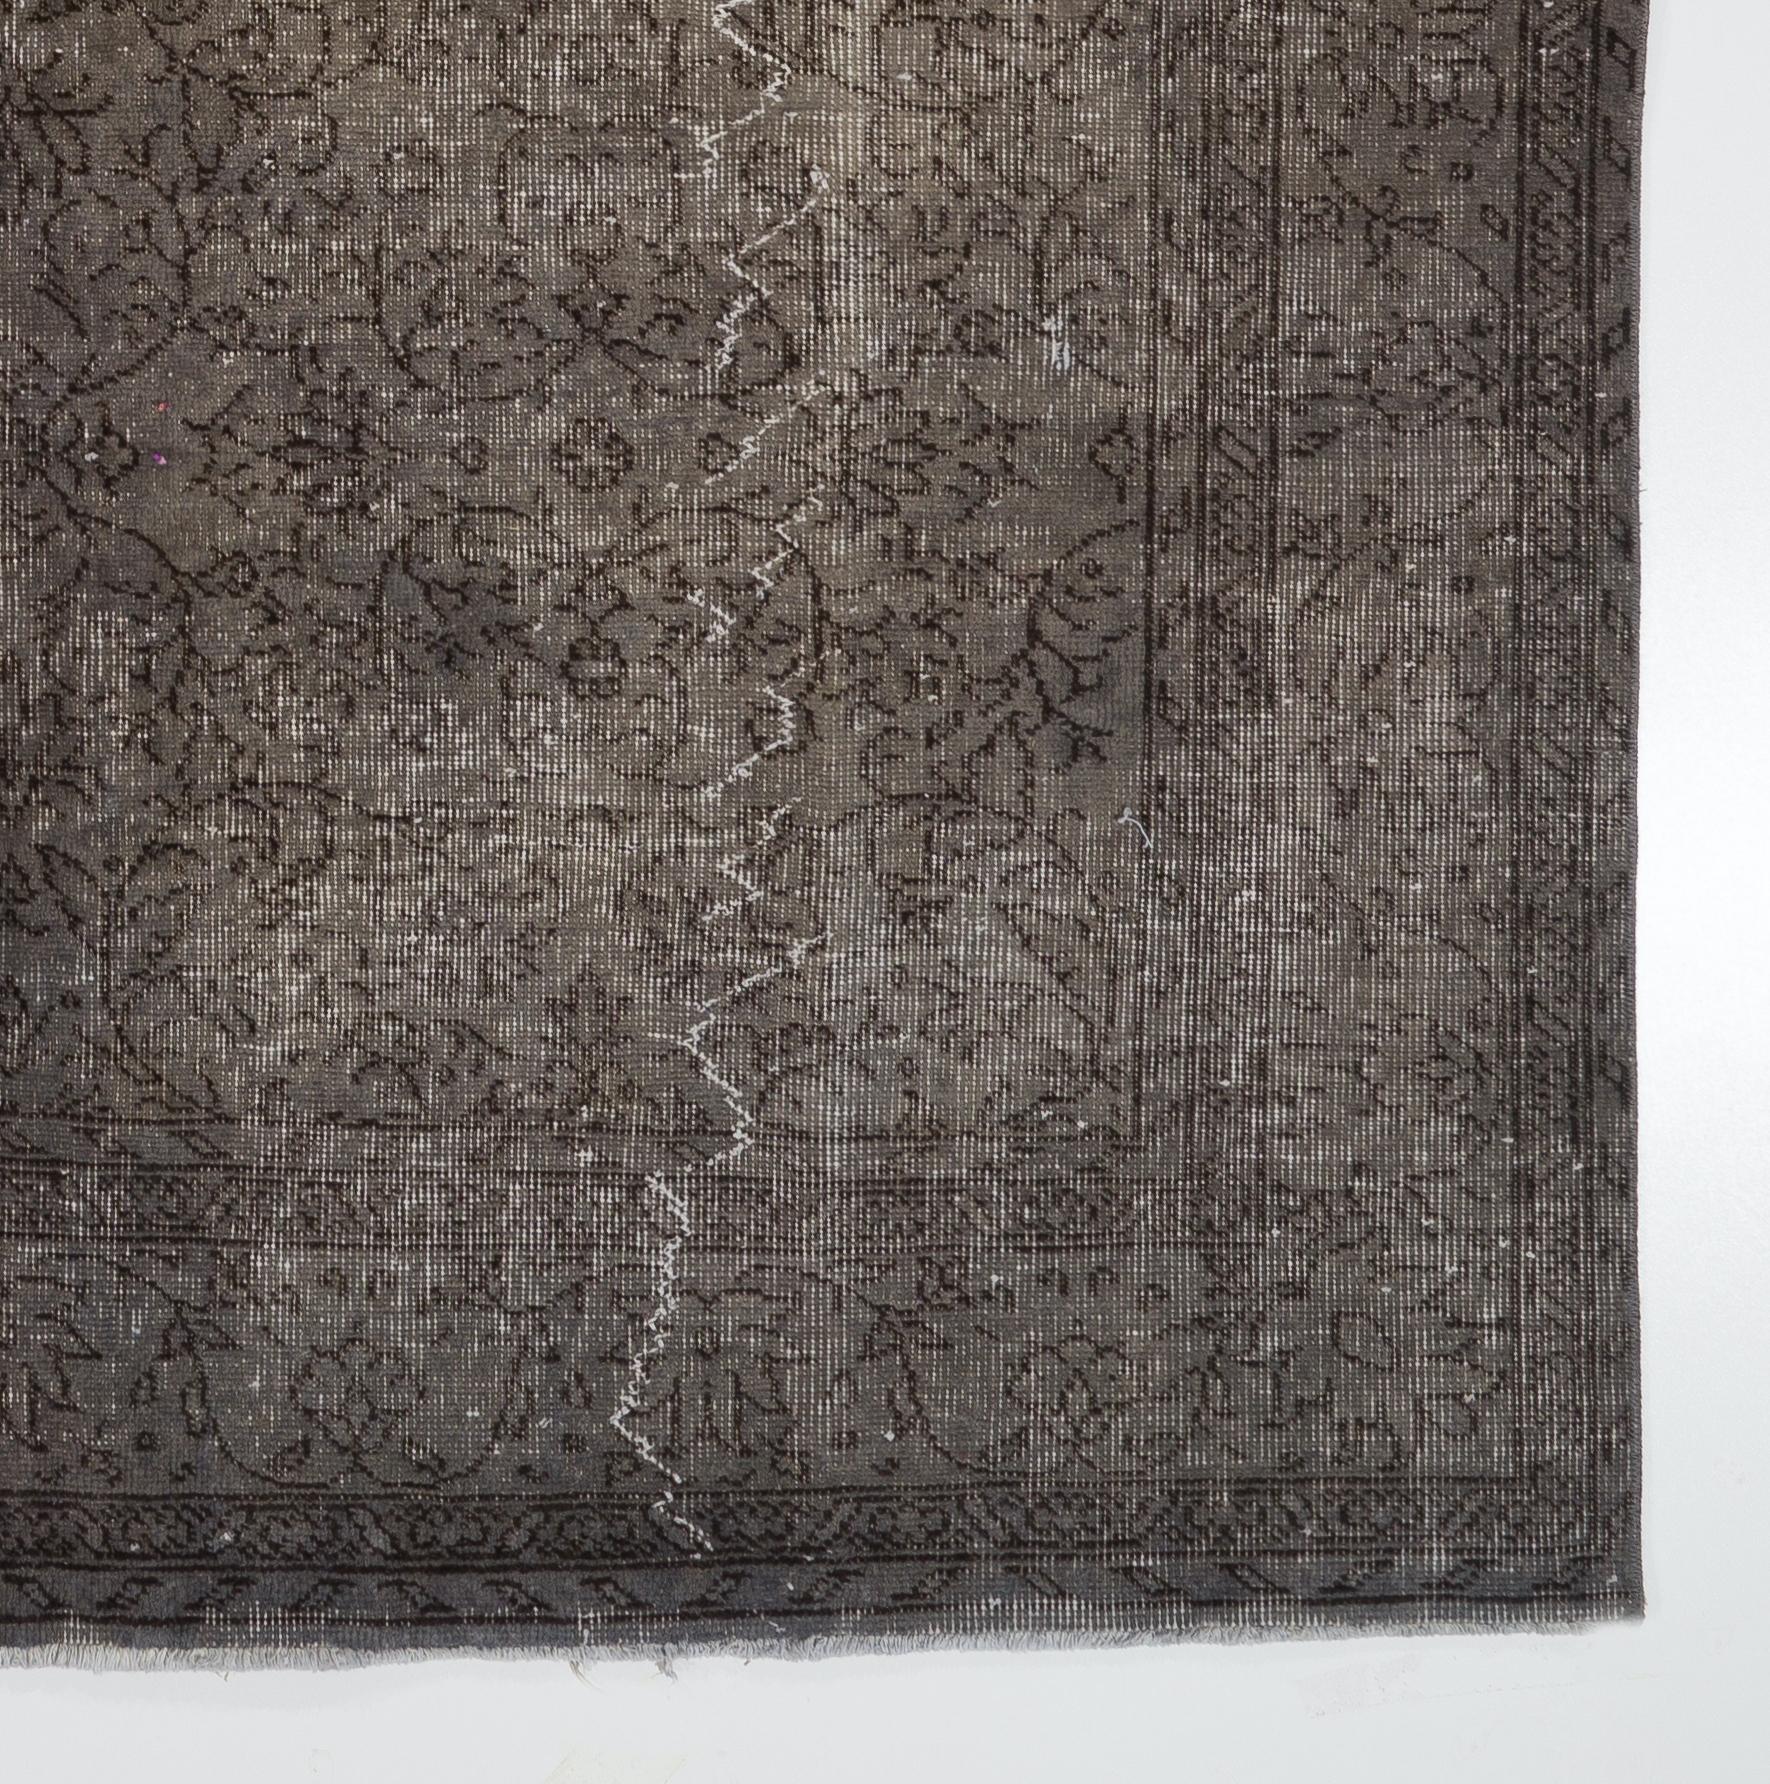 Cotton 6.5x9.7 Ft Distressed Handmade Rug. Modern Gray Carpet. Turkish Floor Covering For Sale